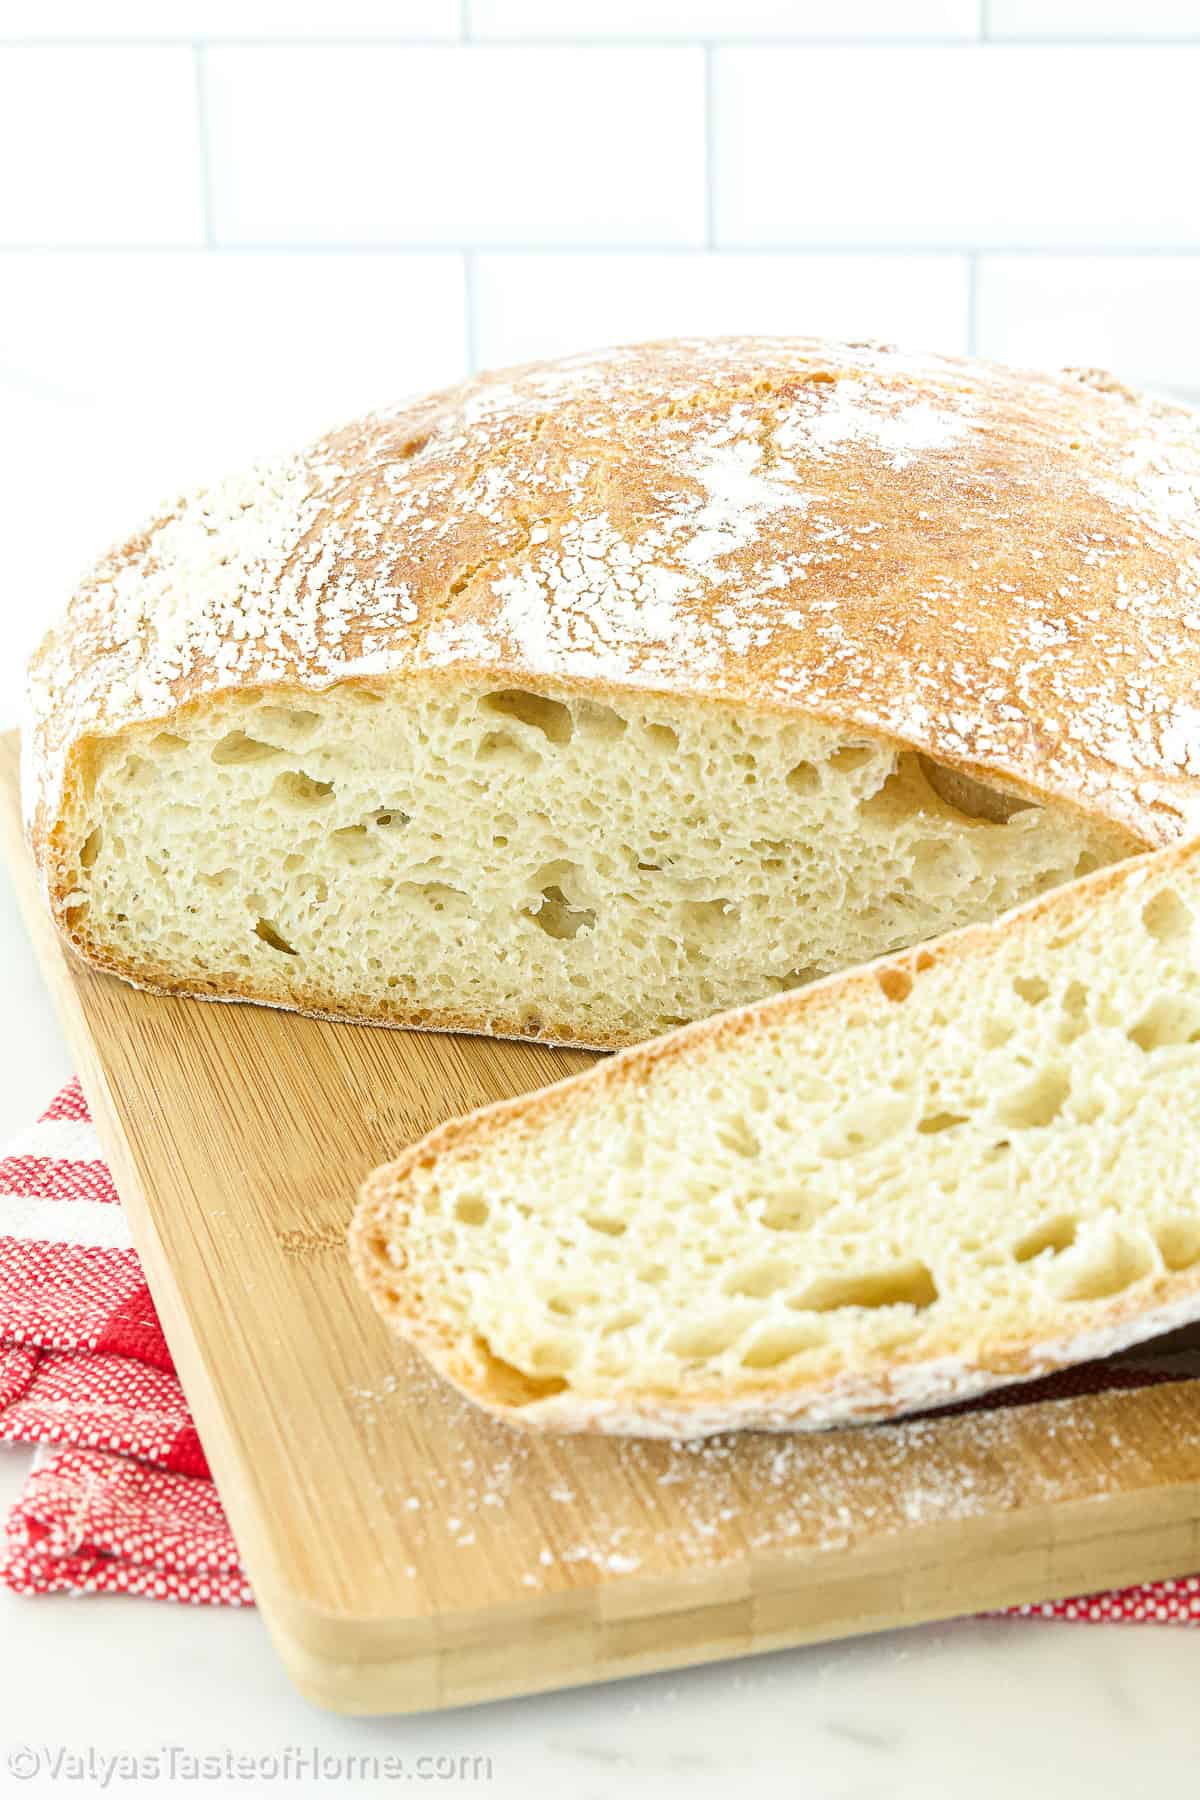 https://www.valyastasteofhome.com/wp-content/uploads/2022/01/The-Perfect-Crusty-Bread-Recipe-Made-in-a-Dutch-Oven-3.jpg